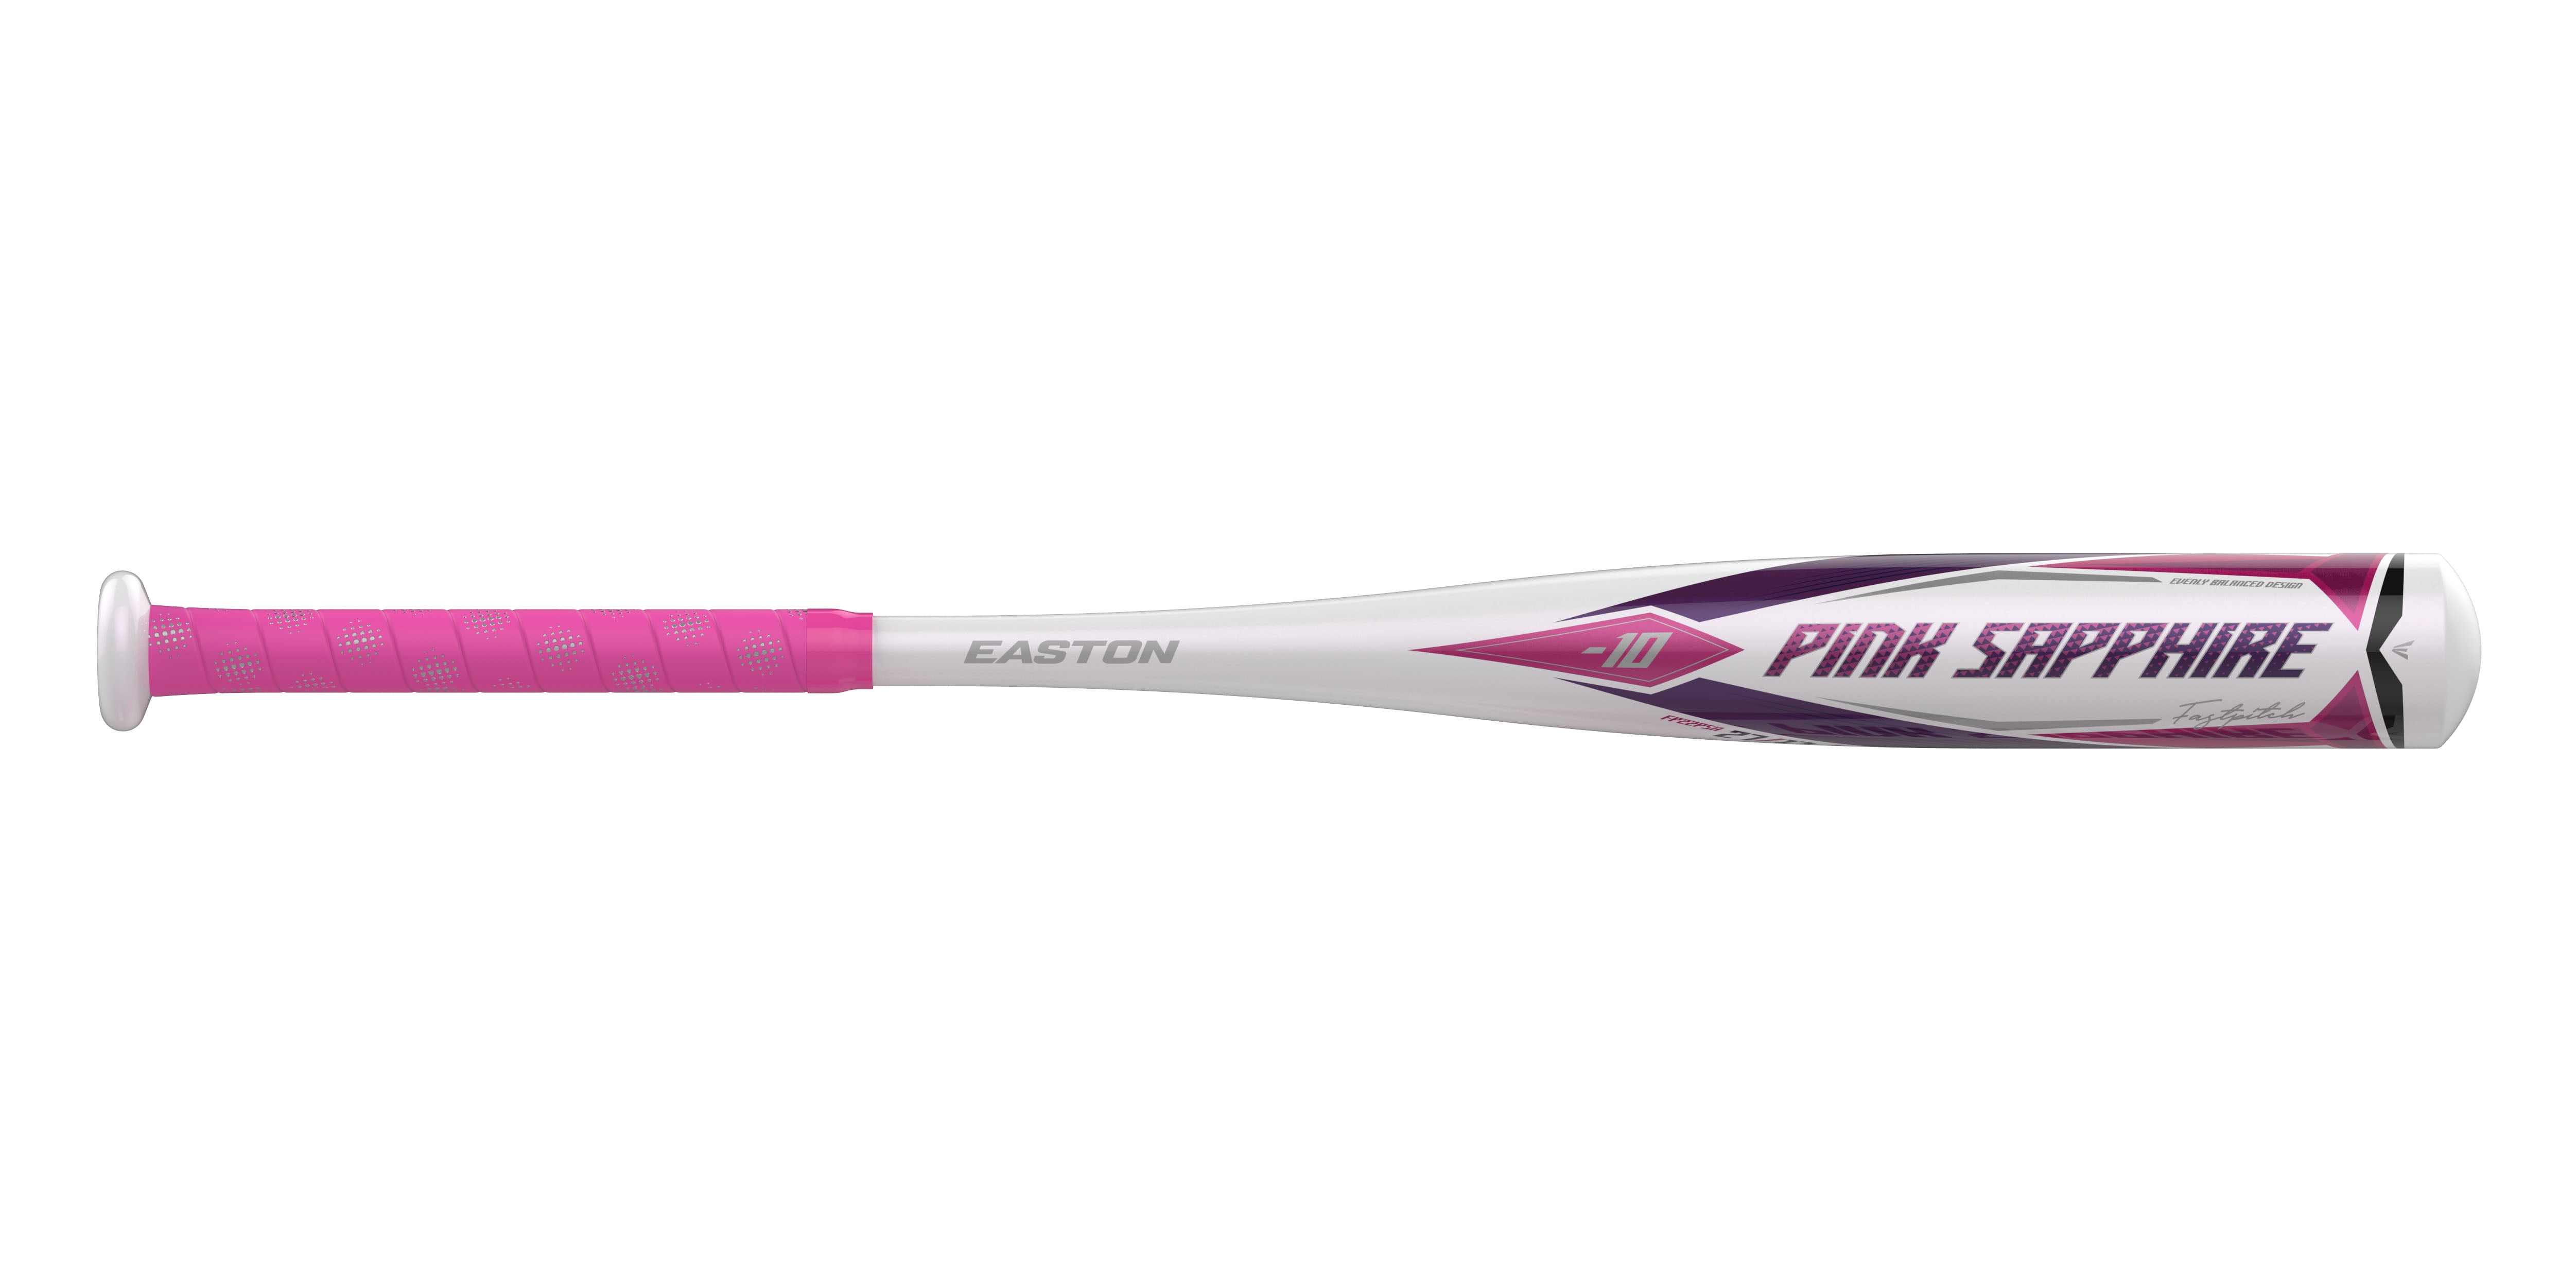 Aluminum Rawlings Storm Fastpitch Softball Bat Approved for All Associations -13 1 Pc 